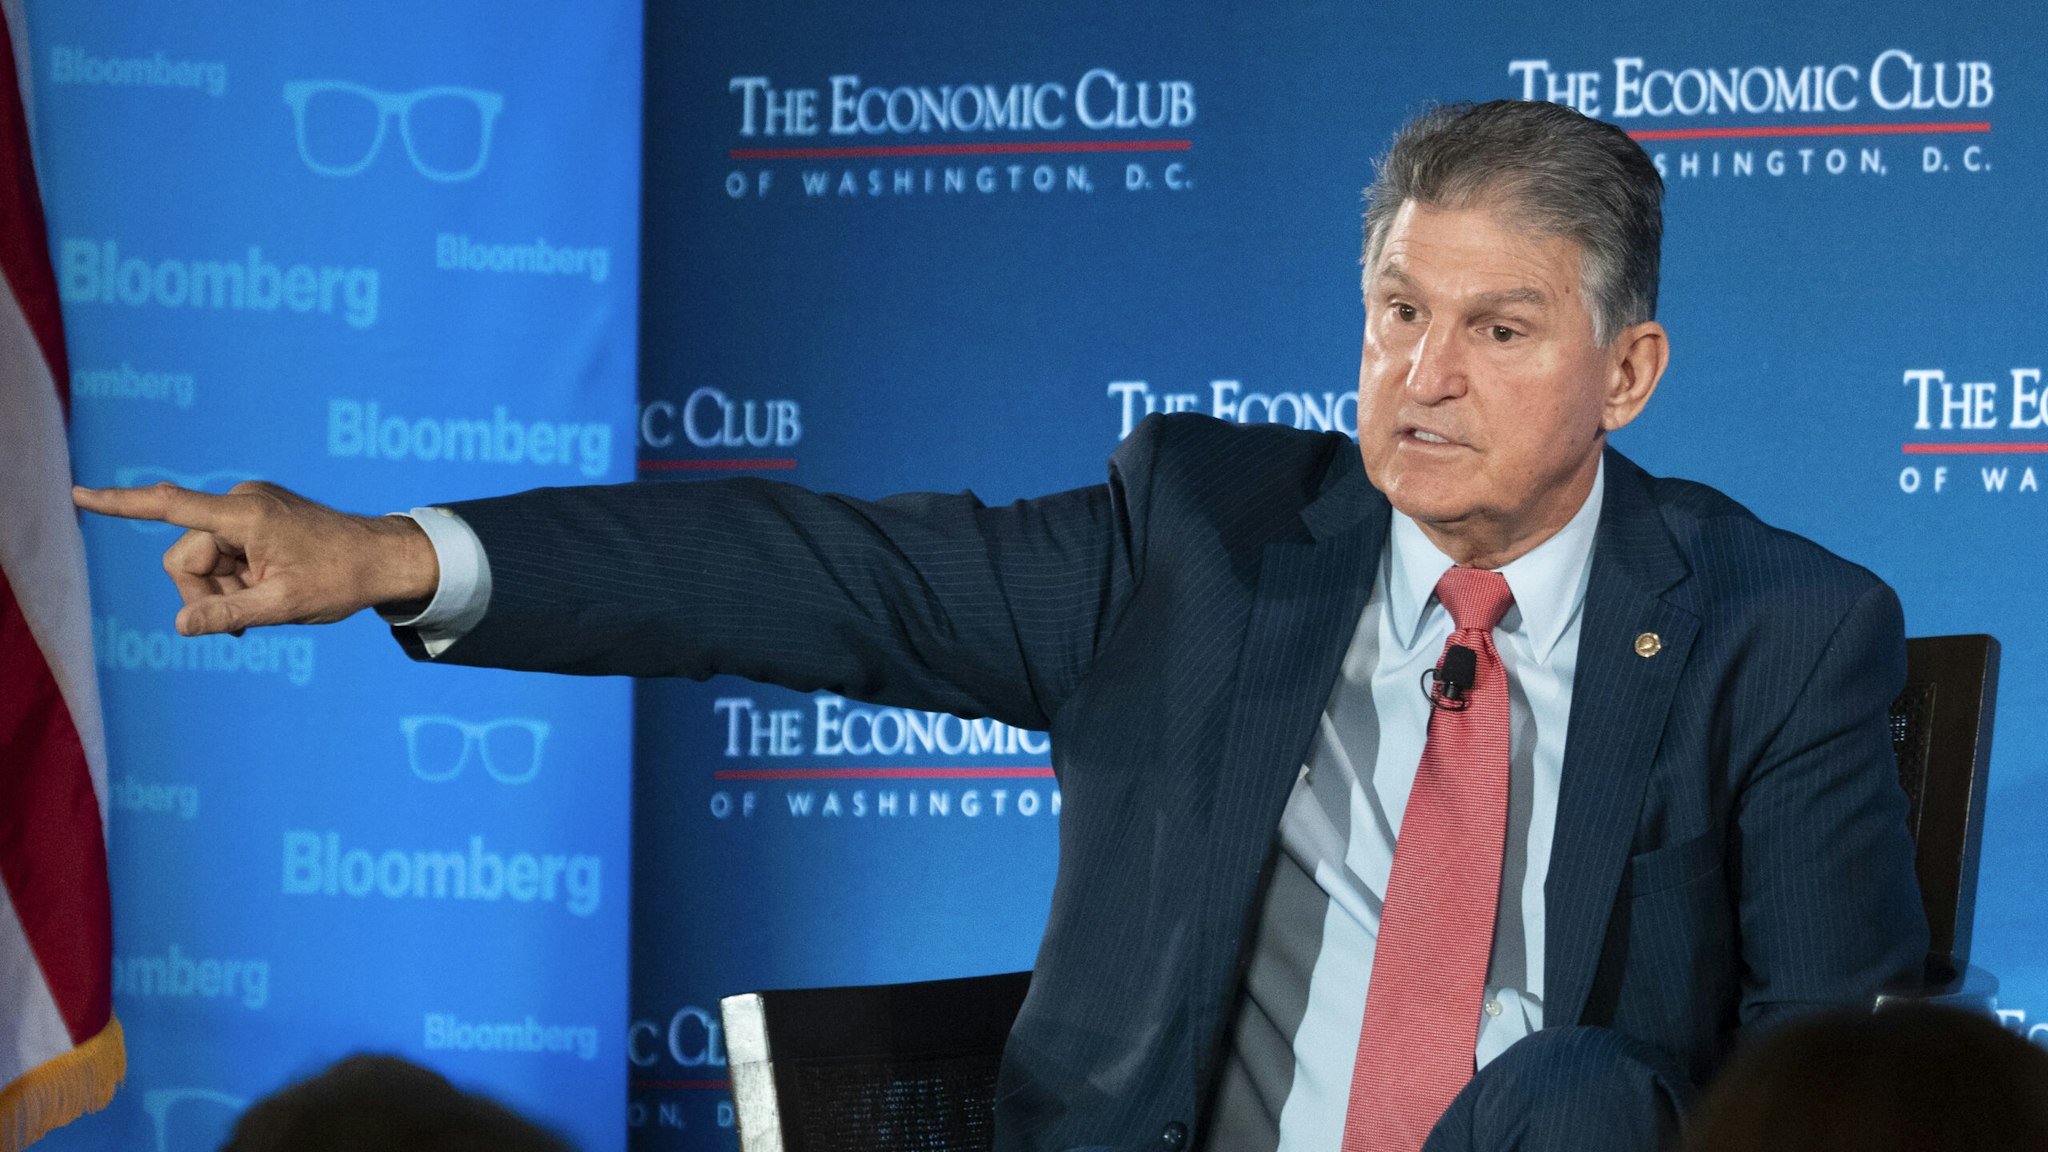 WASHINGTON, DC - OCTOBER 26: Sen. Joe Manchin (D-WV) speaks during an event with the Economic Club of Washington at the Capitol Hilton Hotel October 26, 2021 in Washington, DC. Manchin took questions about the bipartisan infrastructure bill, the Biden administration's Build Back Better Act and his policy priorities.